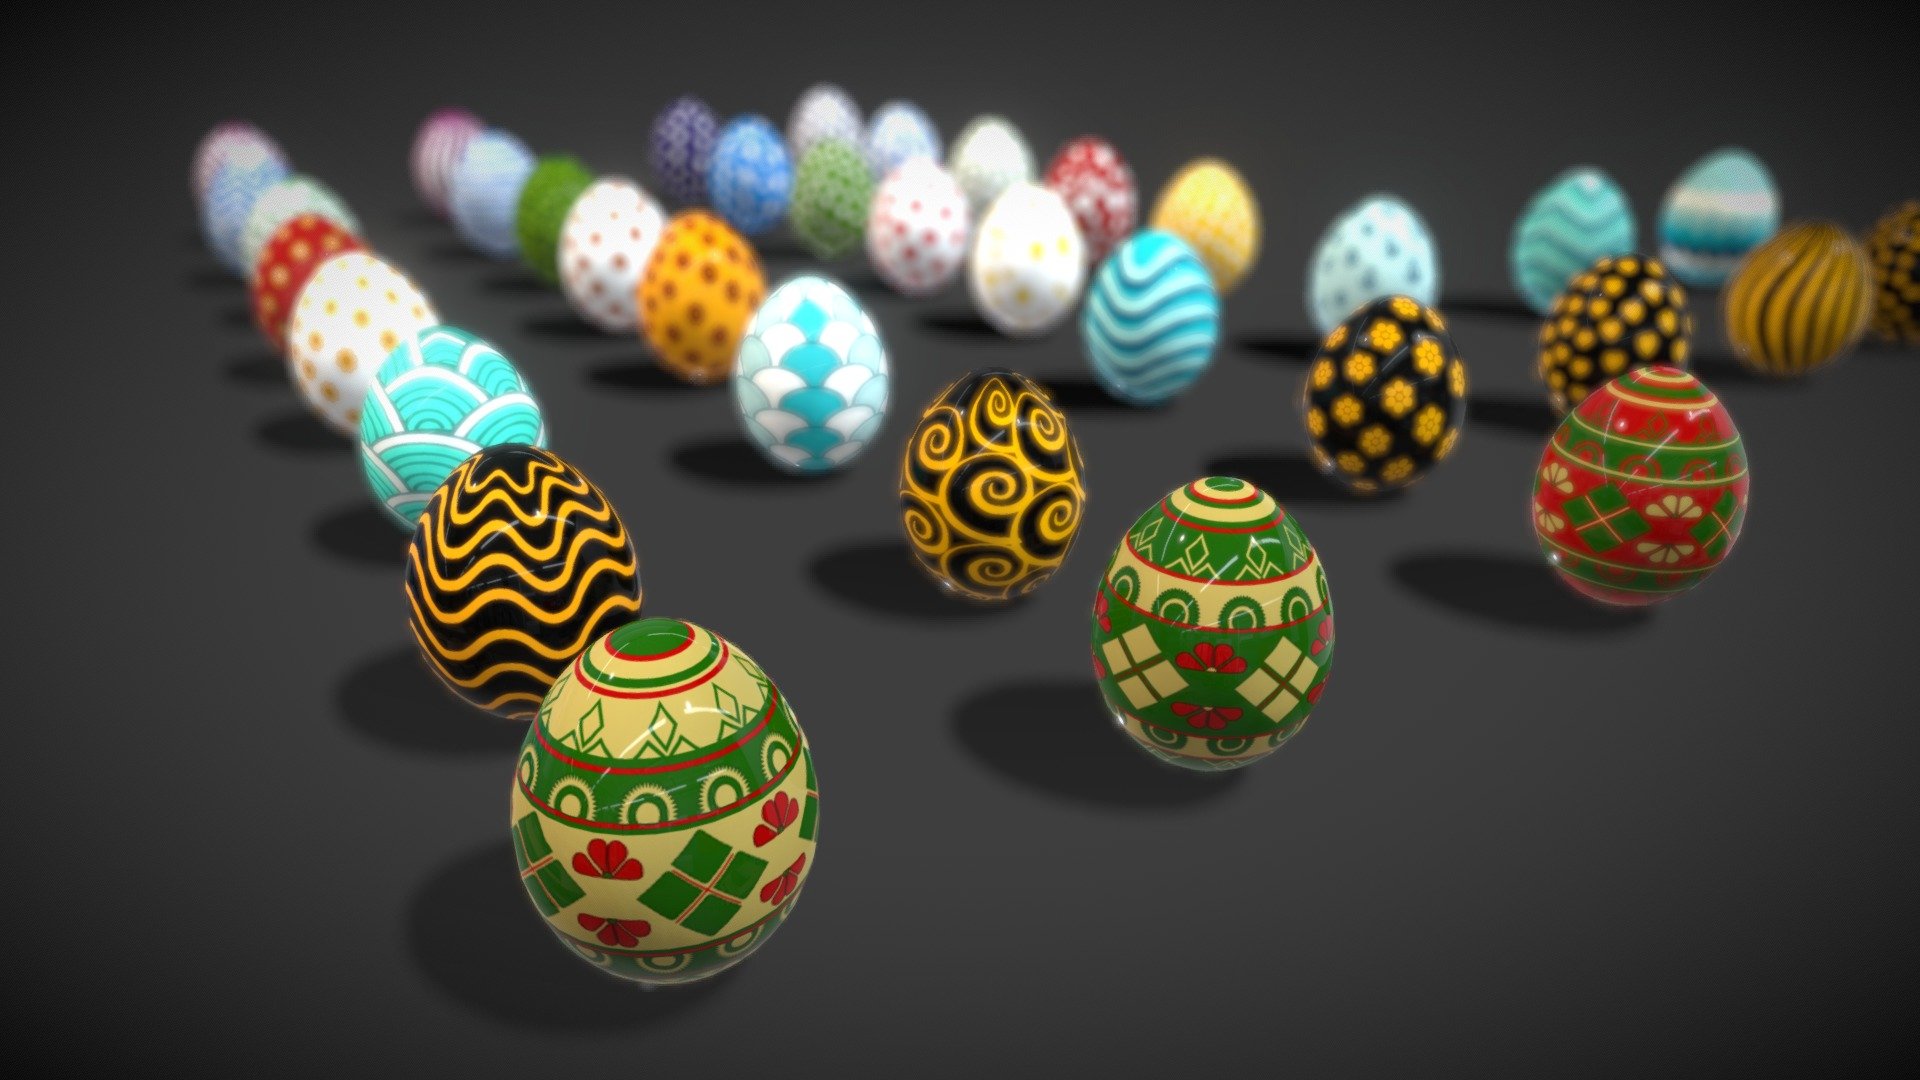 Get ready for Easter!

Collections Easter Eggs 8 model low-poly 3d model ready for Virtual Reality (VR), Augmented Reality (AR), games and other real-time apps. its ready for rendering and advertising too Features: 
- 35 egg prefabs 
- 8 Colections styles texture 
* Polycount list : 
- Model 3D lowpoly Eggs ( 20160 polys/38808 Tris/19111 Verts) 
- 7 Texture colections size 1024/1024 Please contact me if you have questions or need assistance with the models 3d model